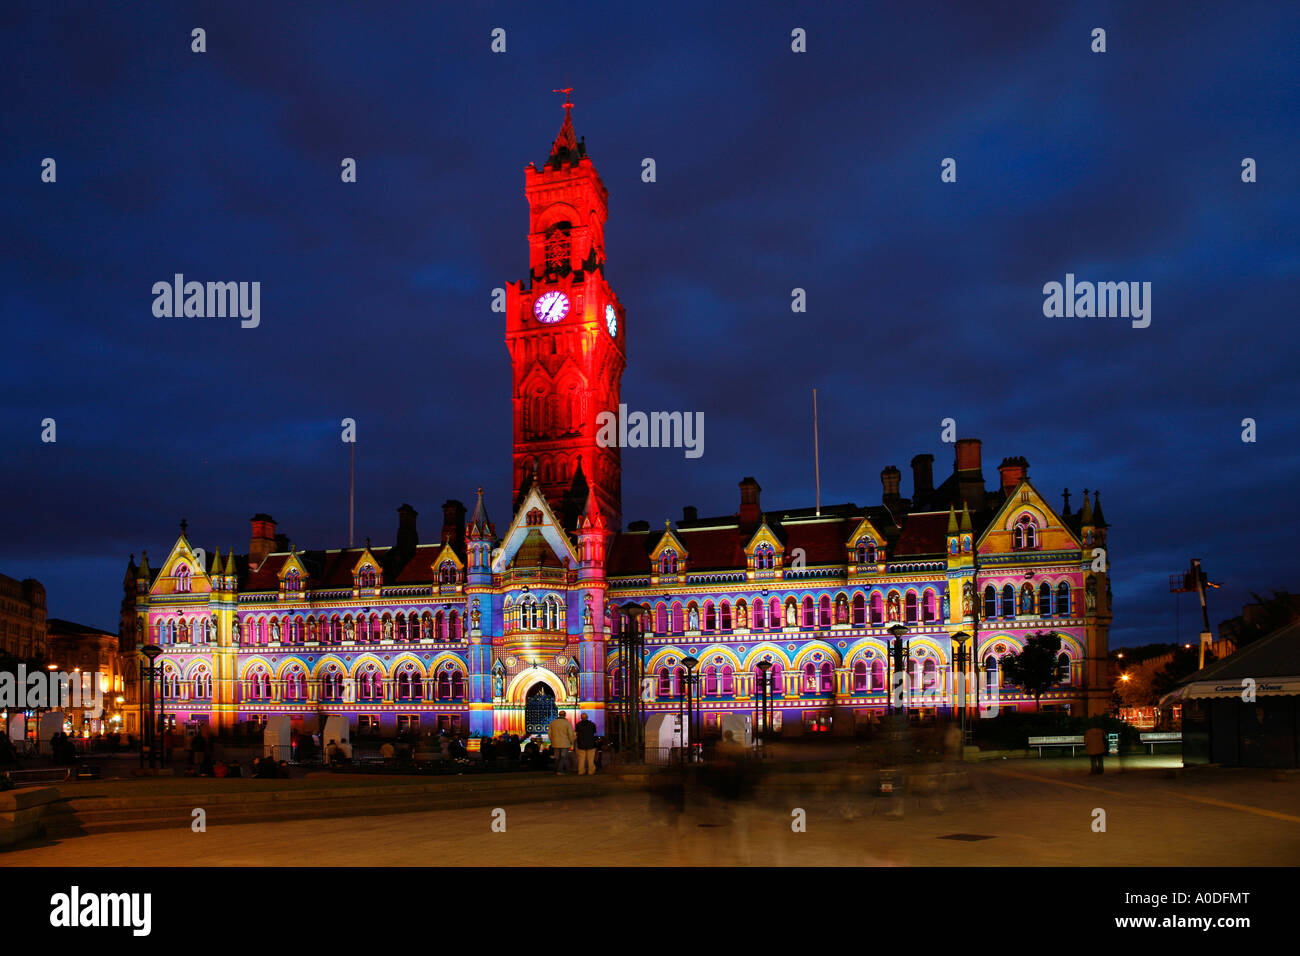 Bradford Town Hall at night painted with light by French Paint Artist, Patrice Warrener Stock Photo